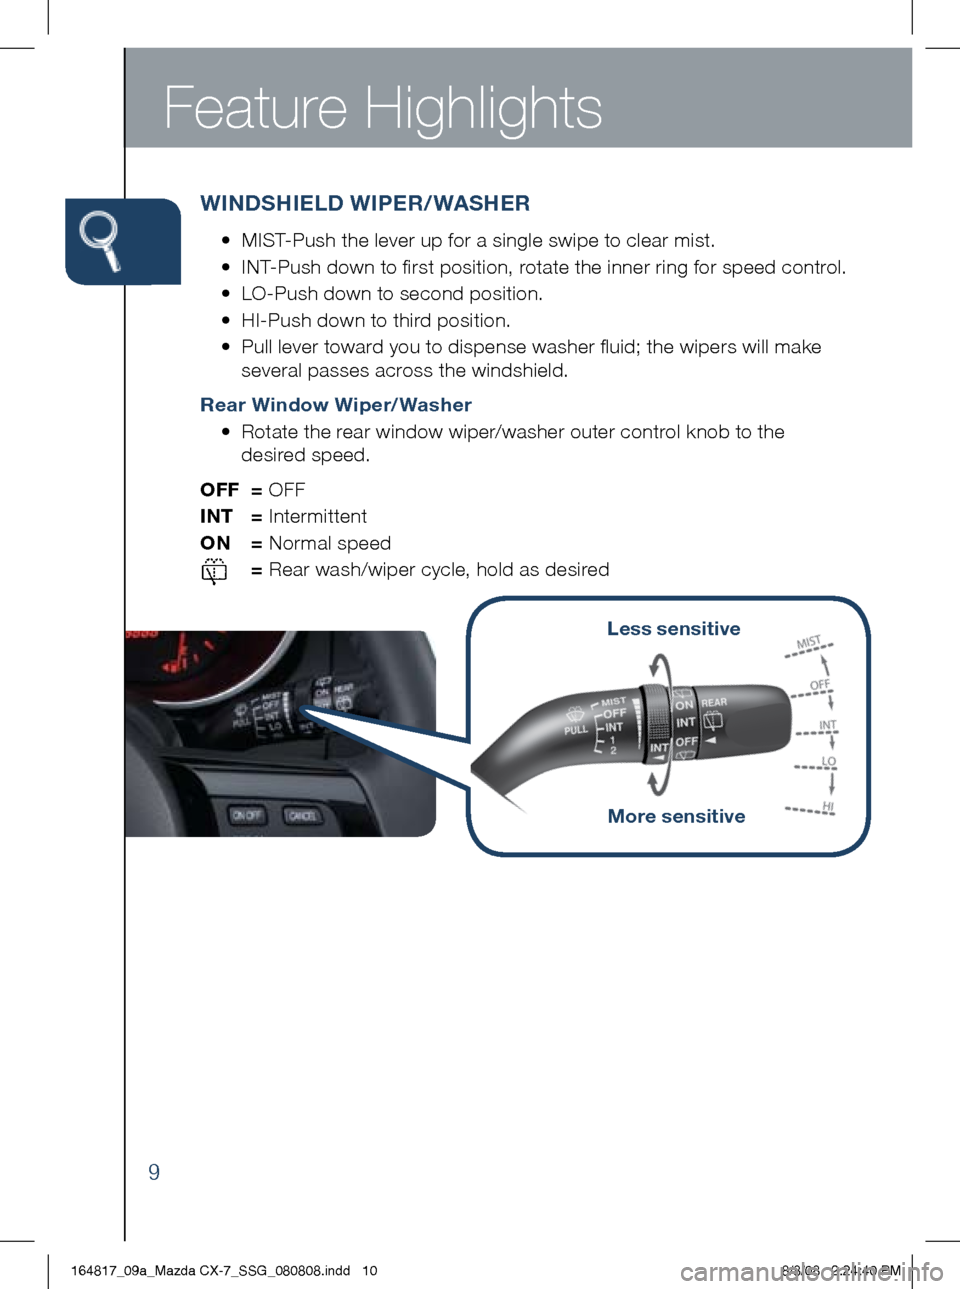 MAZDA MODEL CX-7 2009  Smart Start Guide (in English) Feature Highlights
9
wiNDS hiELD  wiPER/ wAS hER
	 •	 	
MIST-Push	the	lever	up	for	a	single	swipe	to	clear	mist.
	 •	 	
INT-Push	down	to	first	position,	rotate	the	inner	ring	for	speed	control.
	 